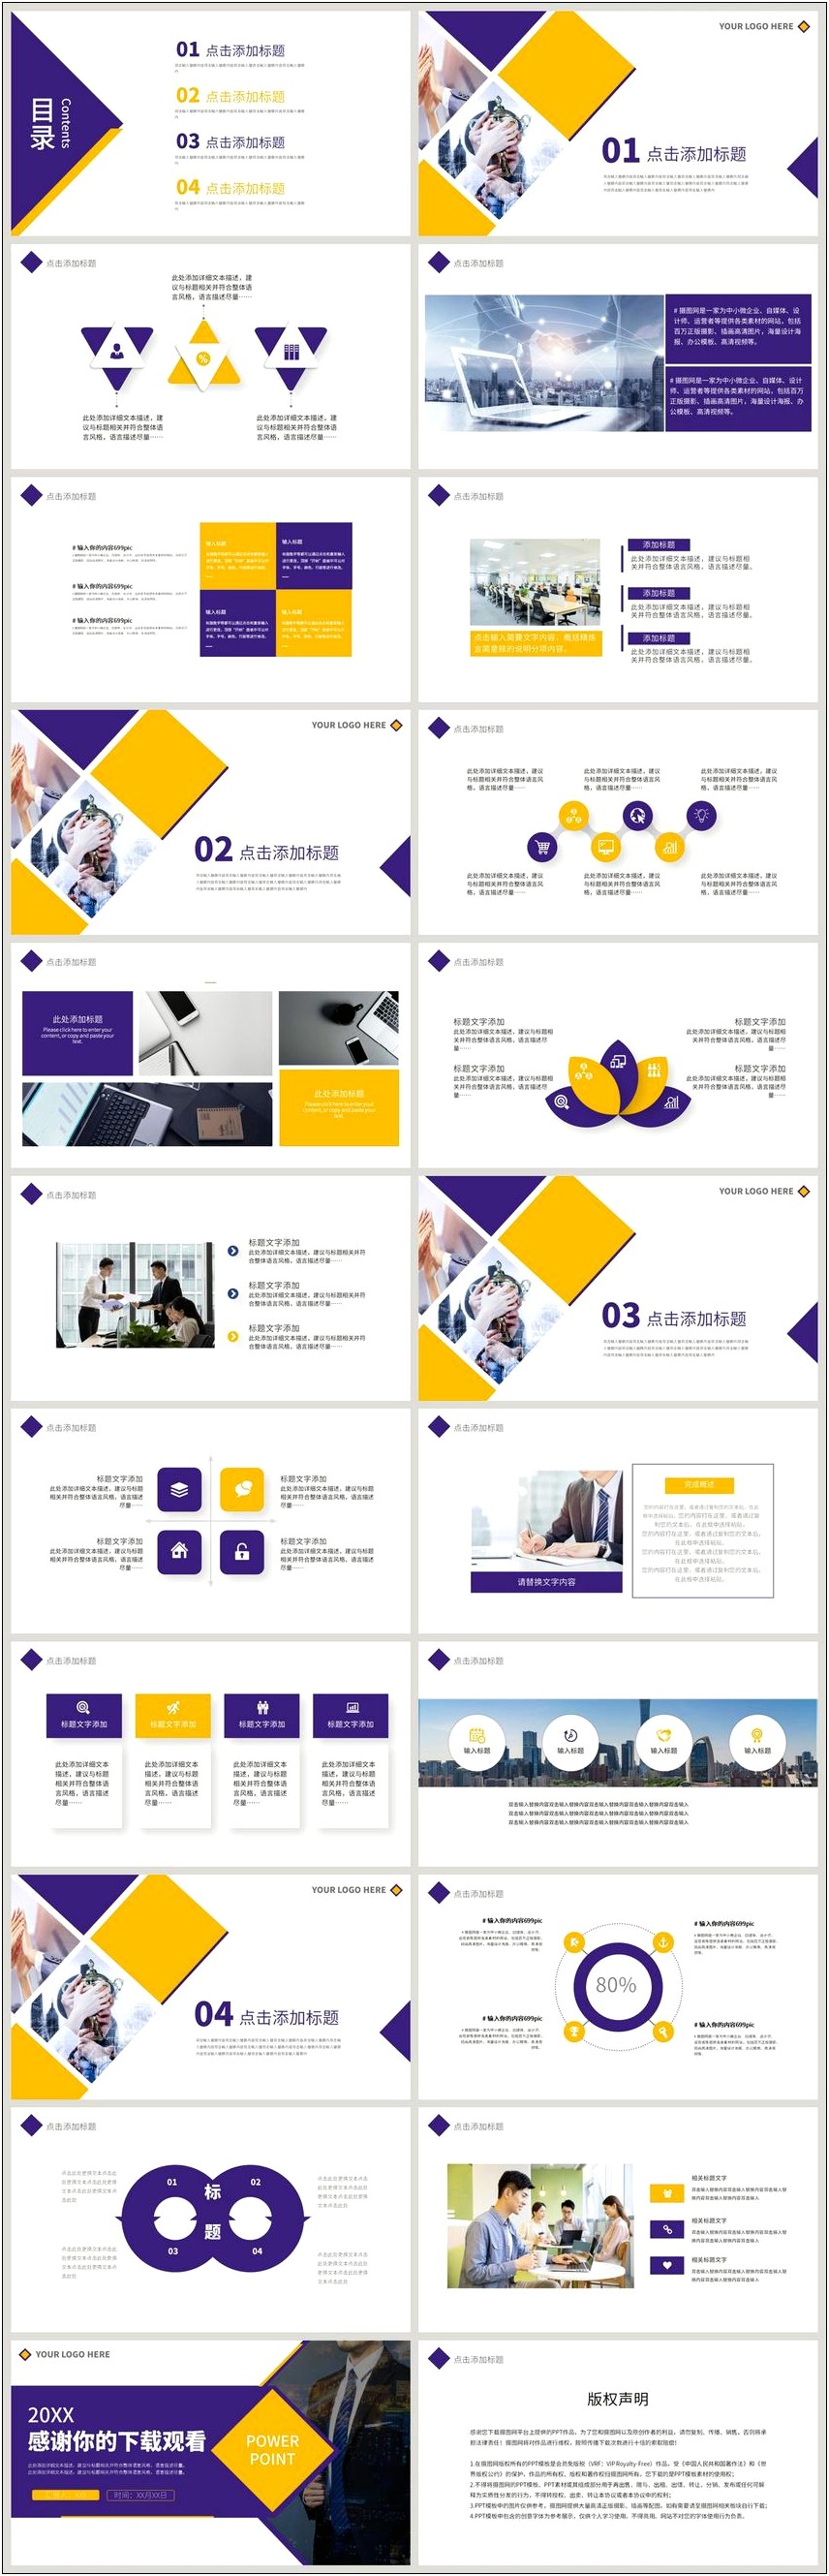 Powerpoint Templates Free Download Project Management